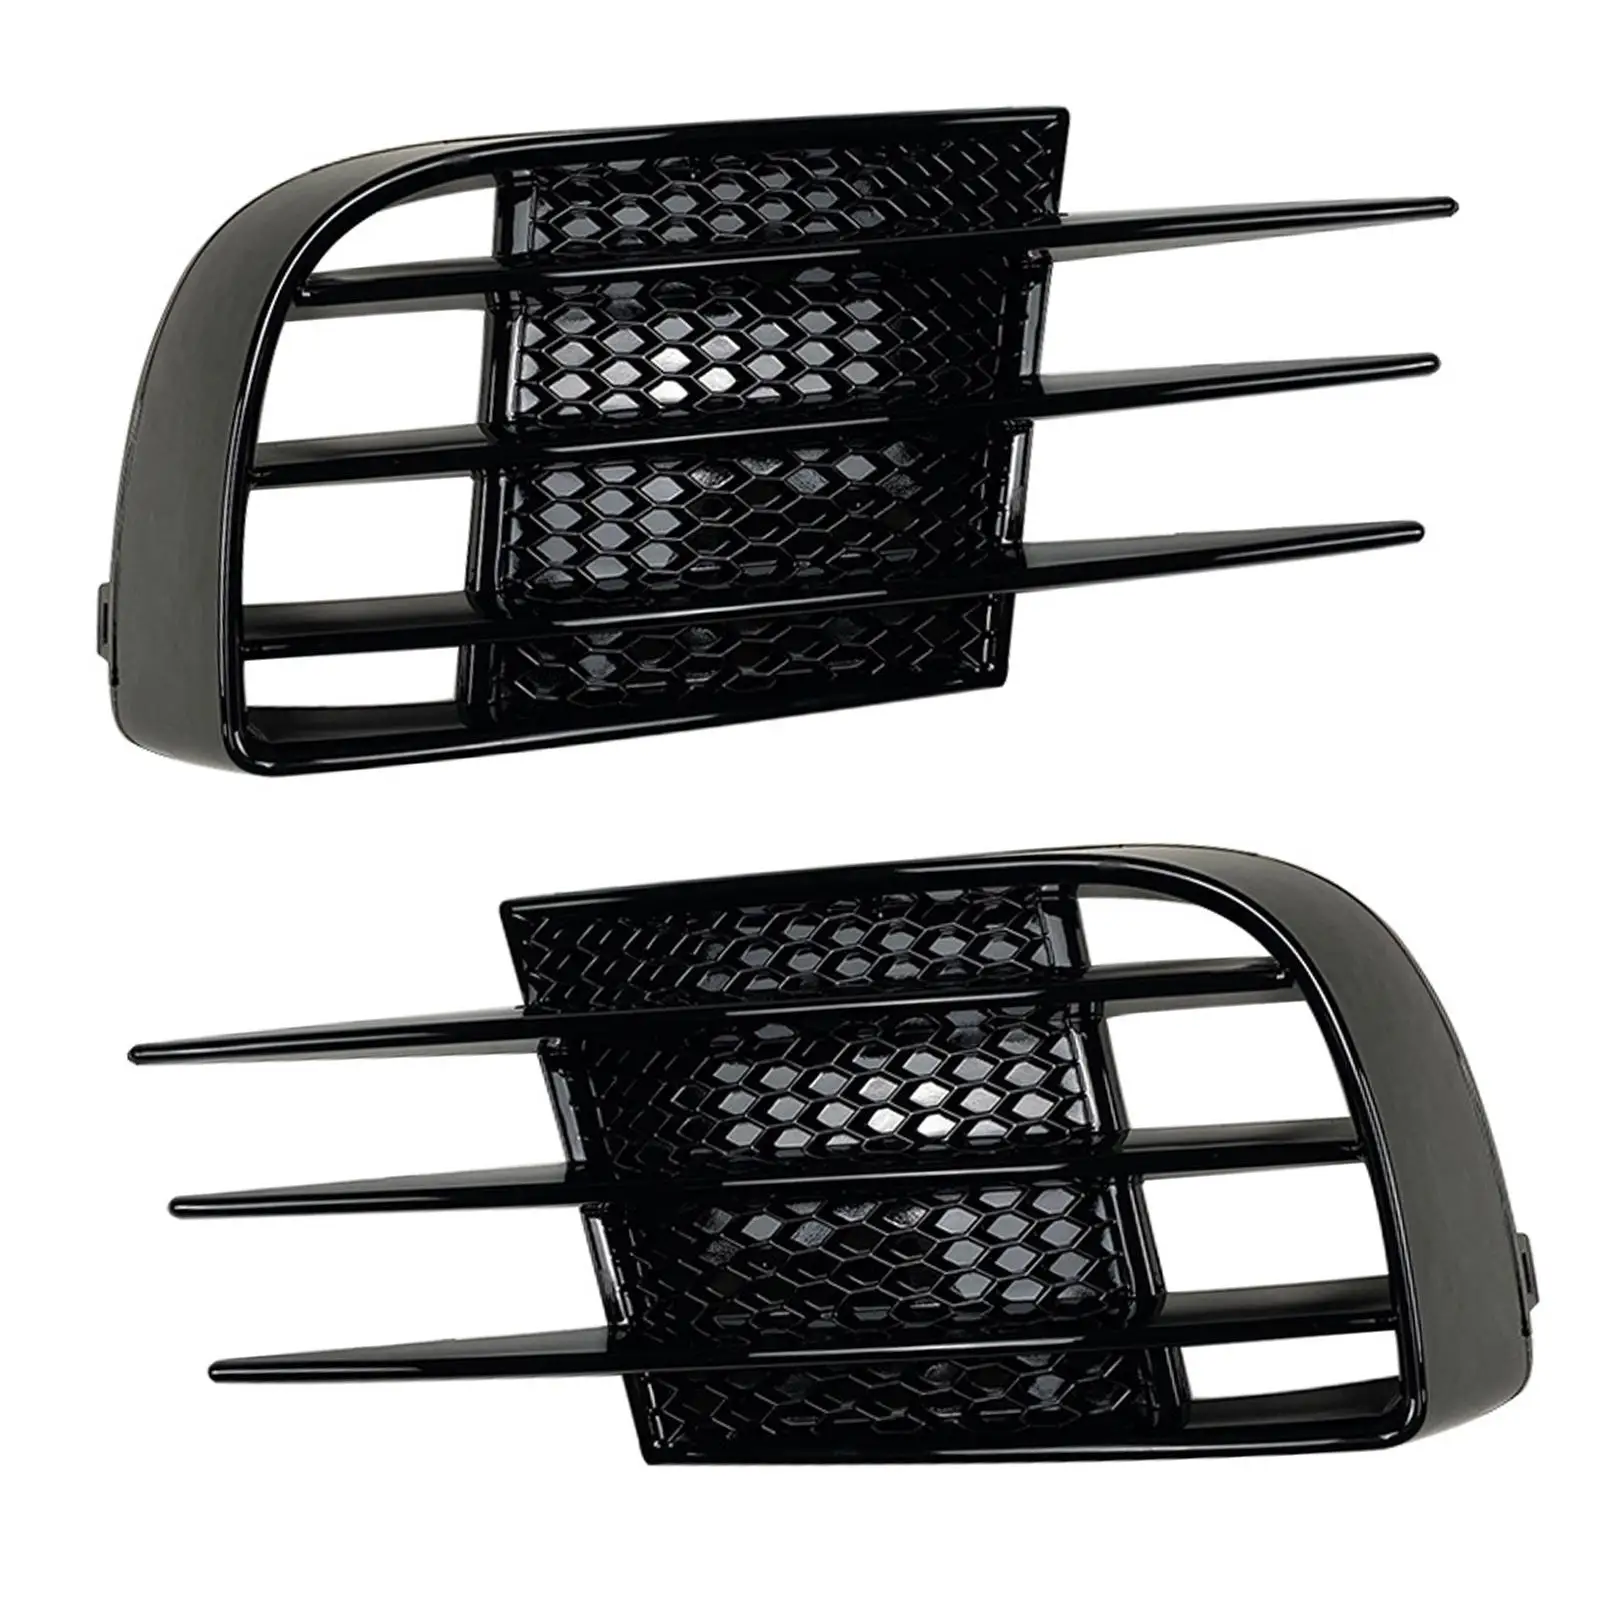 Front Fog Light Grill Cover Trim Replacement for Golf 6 GTI Gtd ABS Material